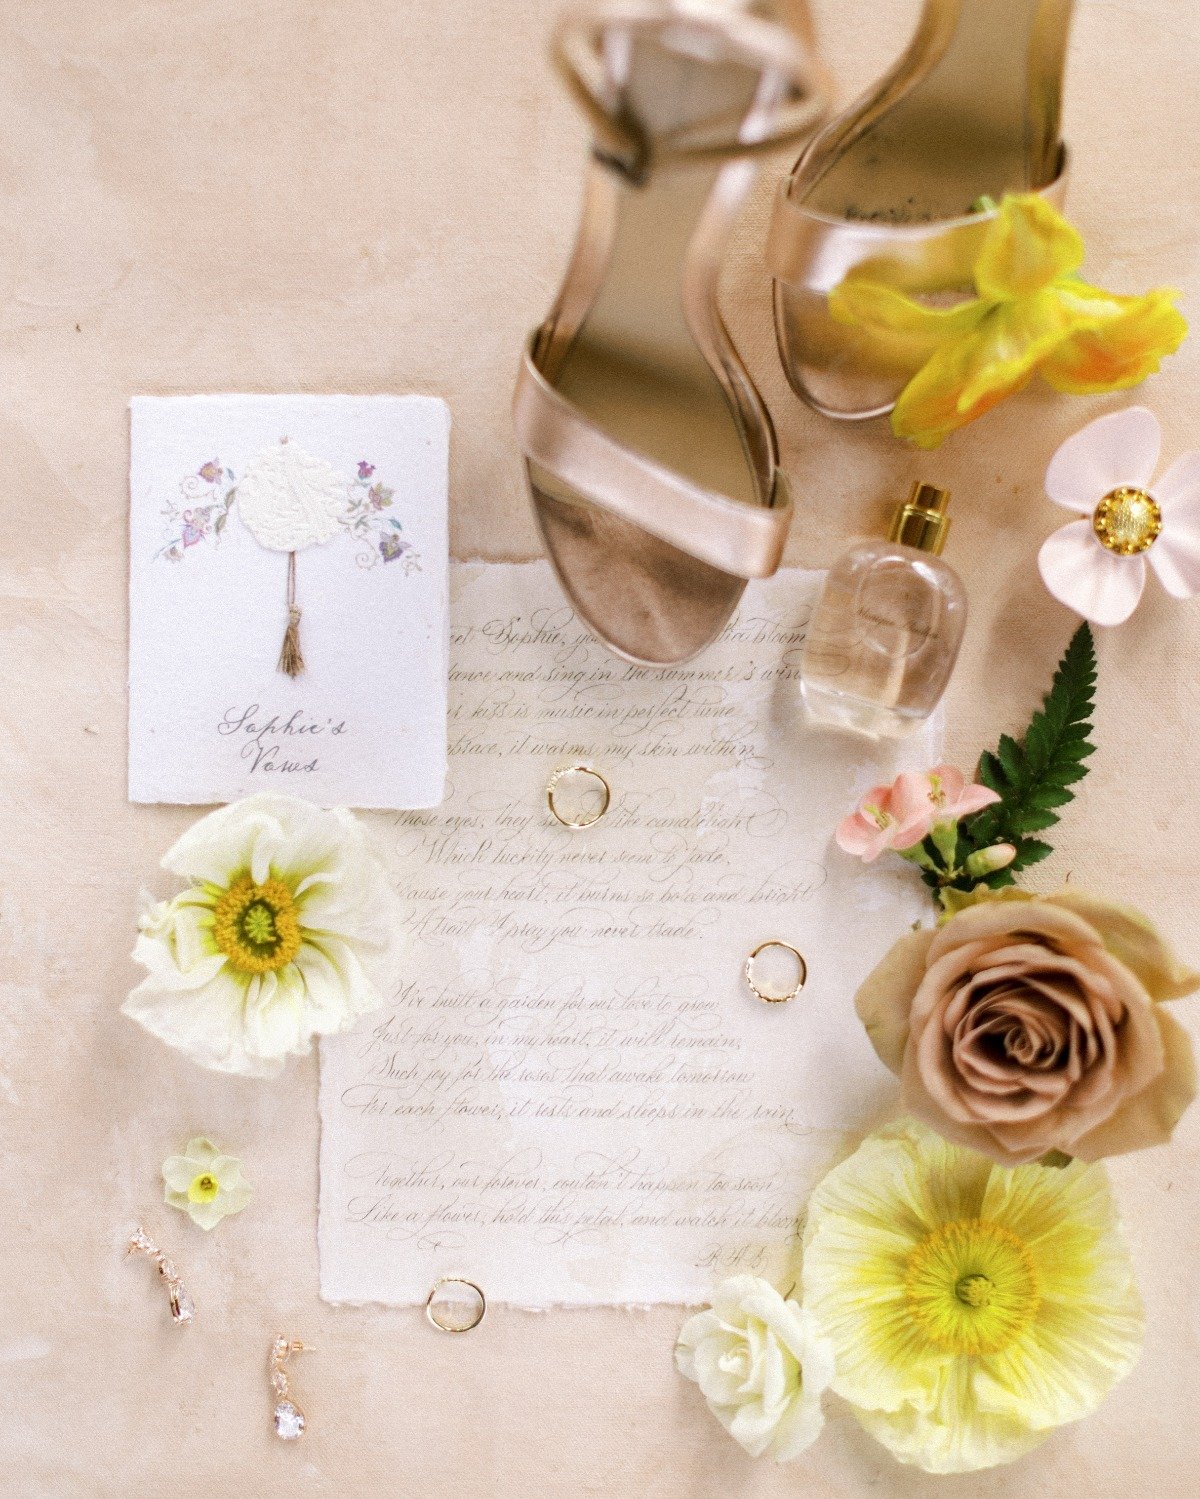 Aerial view of vows, wedding rings, and bridal shoes with flowers surrounding